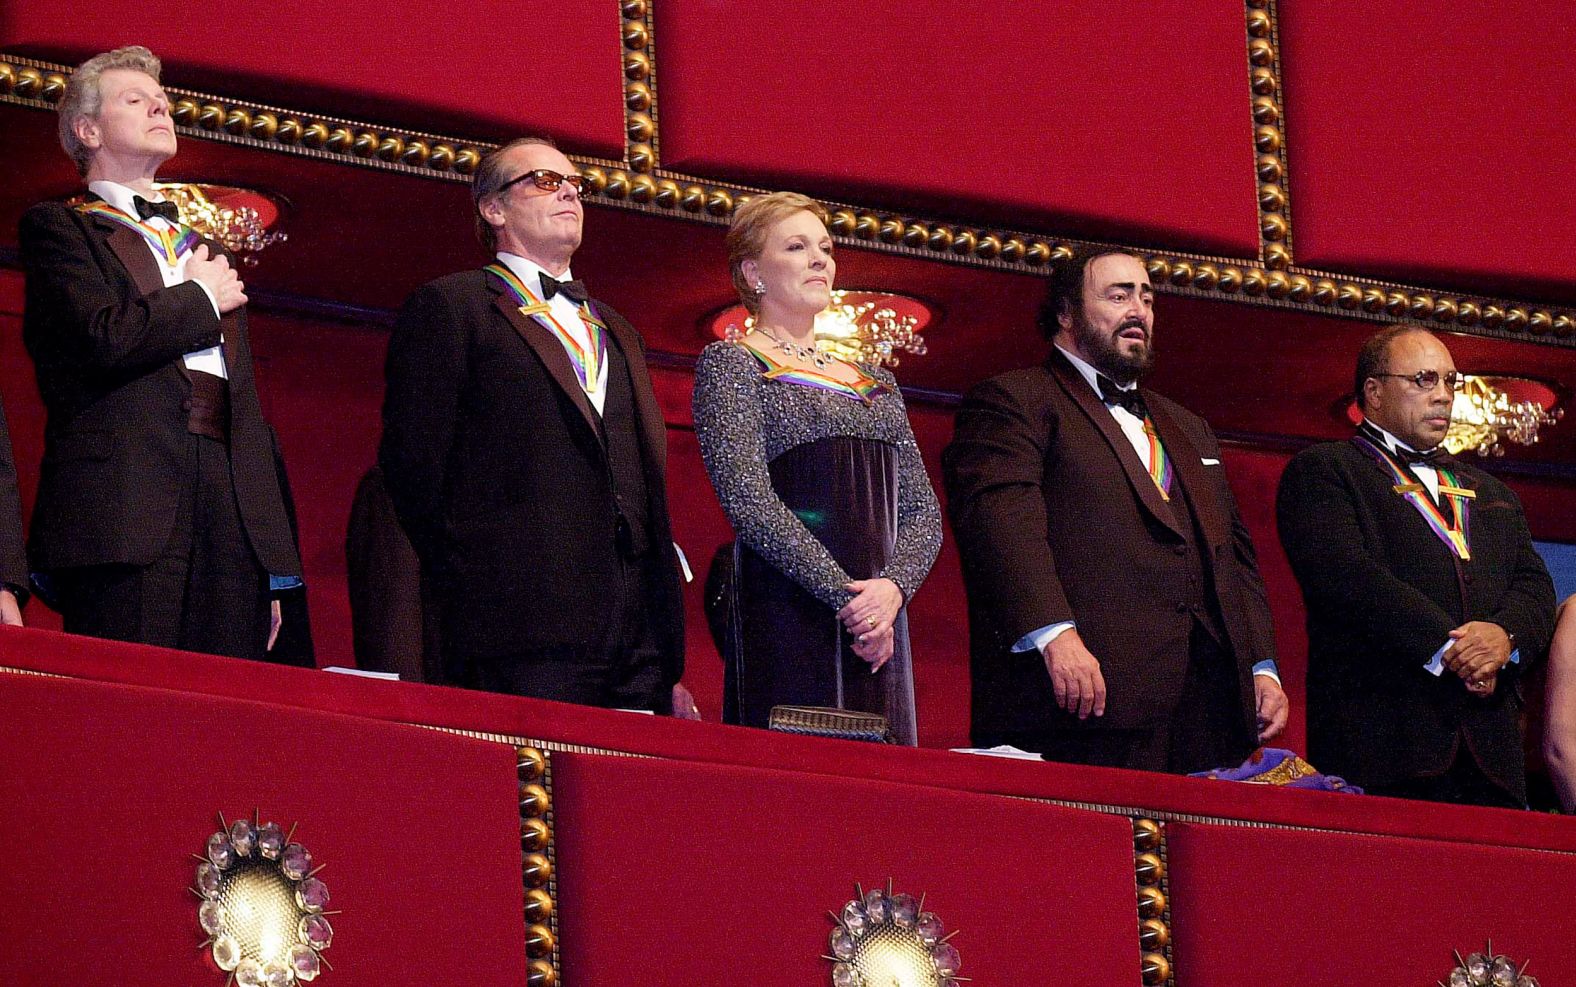 Andrews was one of the Kennedy Center honorees in 2001. From left are pianist Van Cliburn, actor Jack Nicholson, Andrews, tenor Luciano Pavarotti and music producer Quincy Jones.